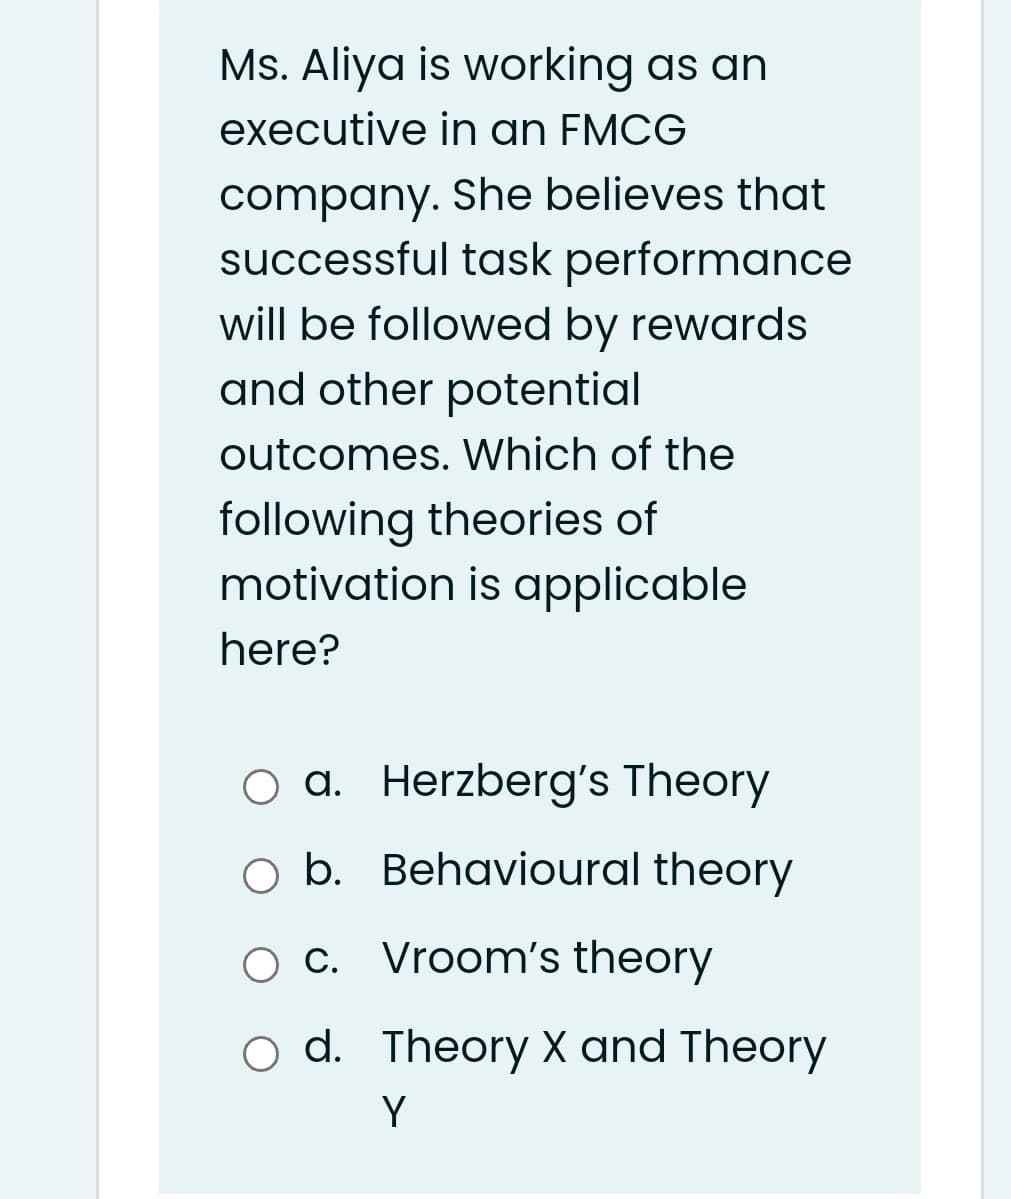 Ms. Aliya is working as an
executive in an FMCG
company. She believes that
successful task performance
will be followed by rewards
and other potential
outcomes. Which of the
following theories of
motivation is applicable
here?
a. Herzberg's Theory
O b. Behavioural theory
O c. Vroom's theory
d. Theory X and Theory
Y
